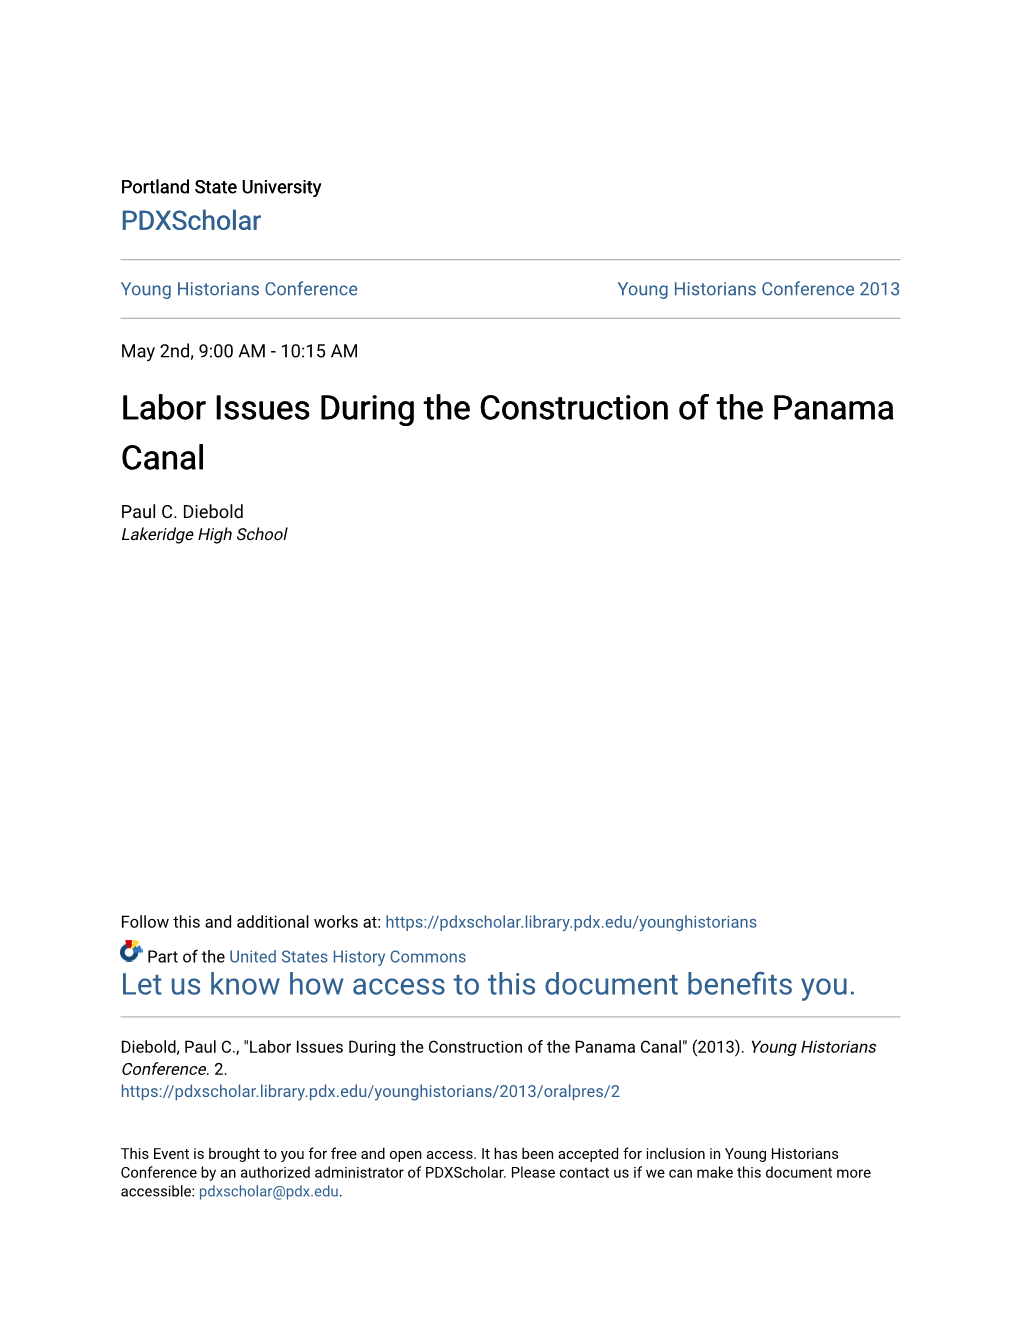 Labor Issues During the Construction of the Panama Canal